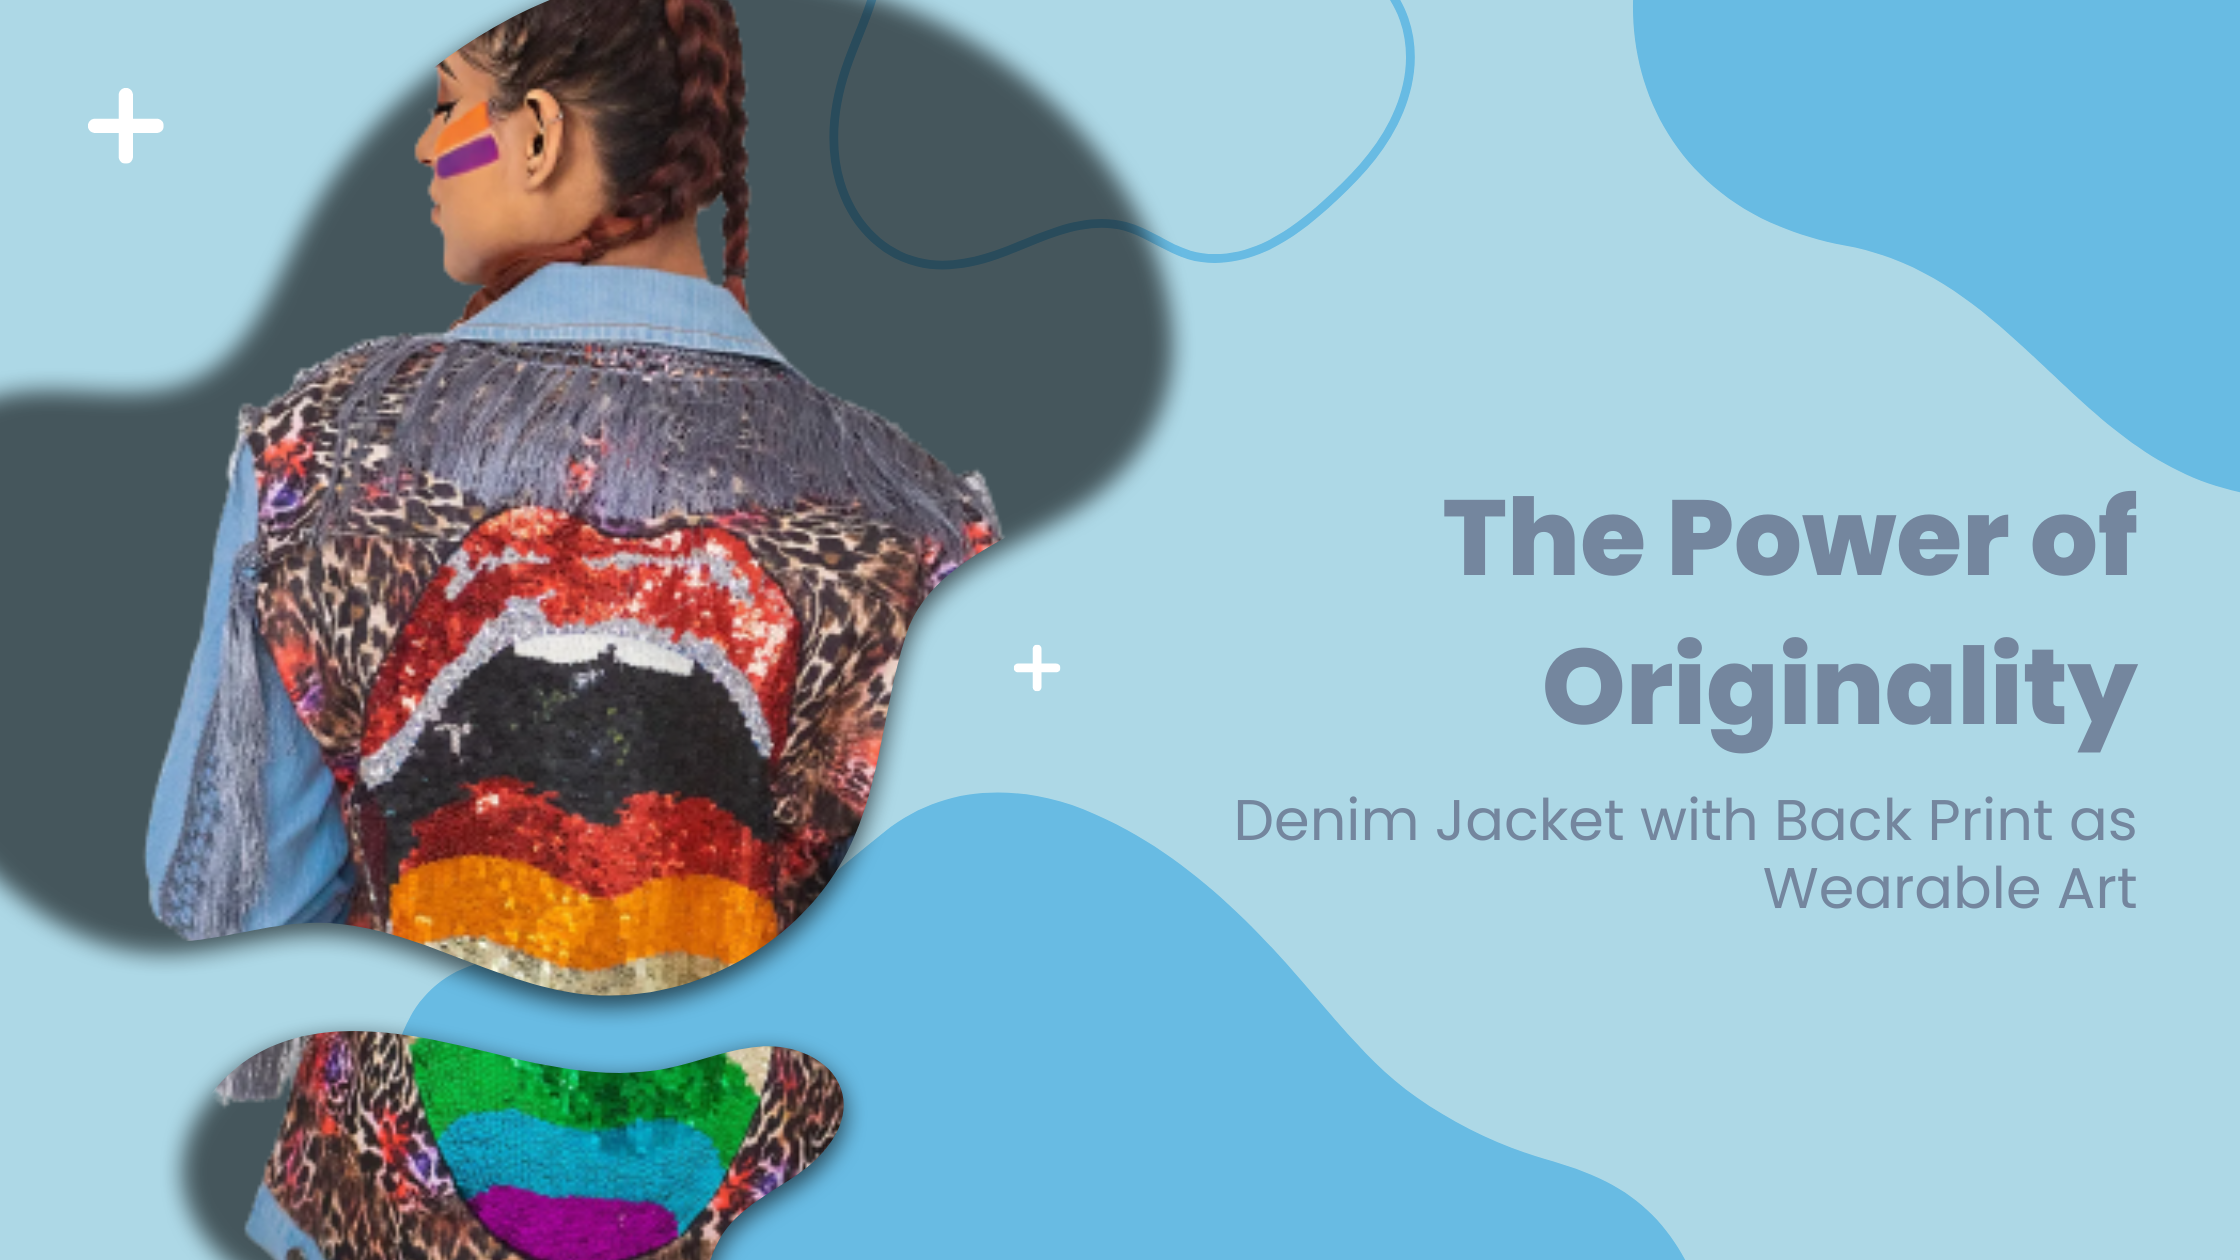 THE POWER OF ORIGINALITY: DENIM JACKET WITH BACK PRINT AS WEARABLE ART